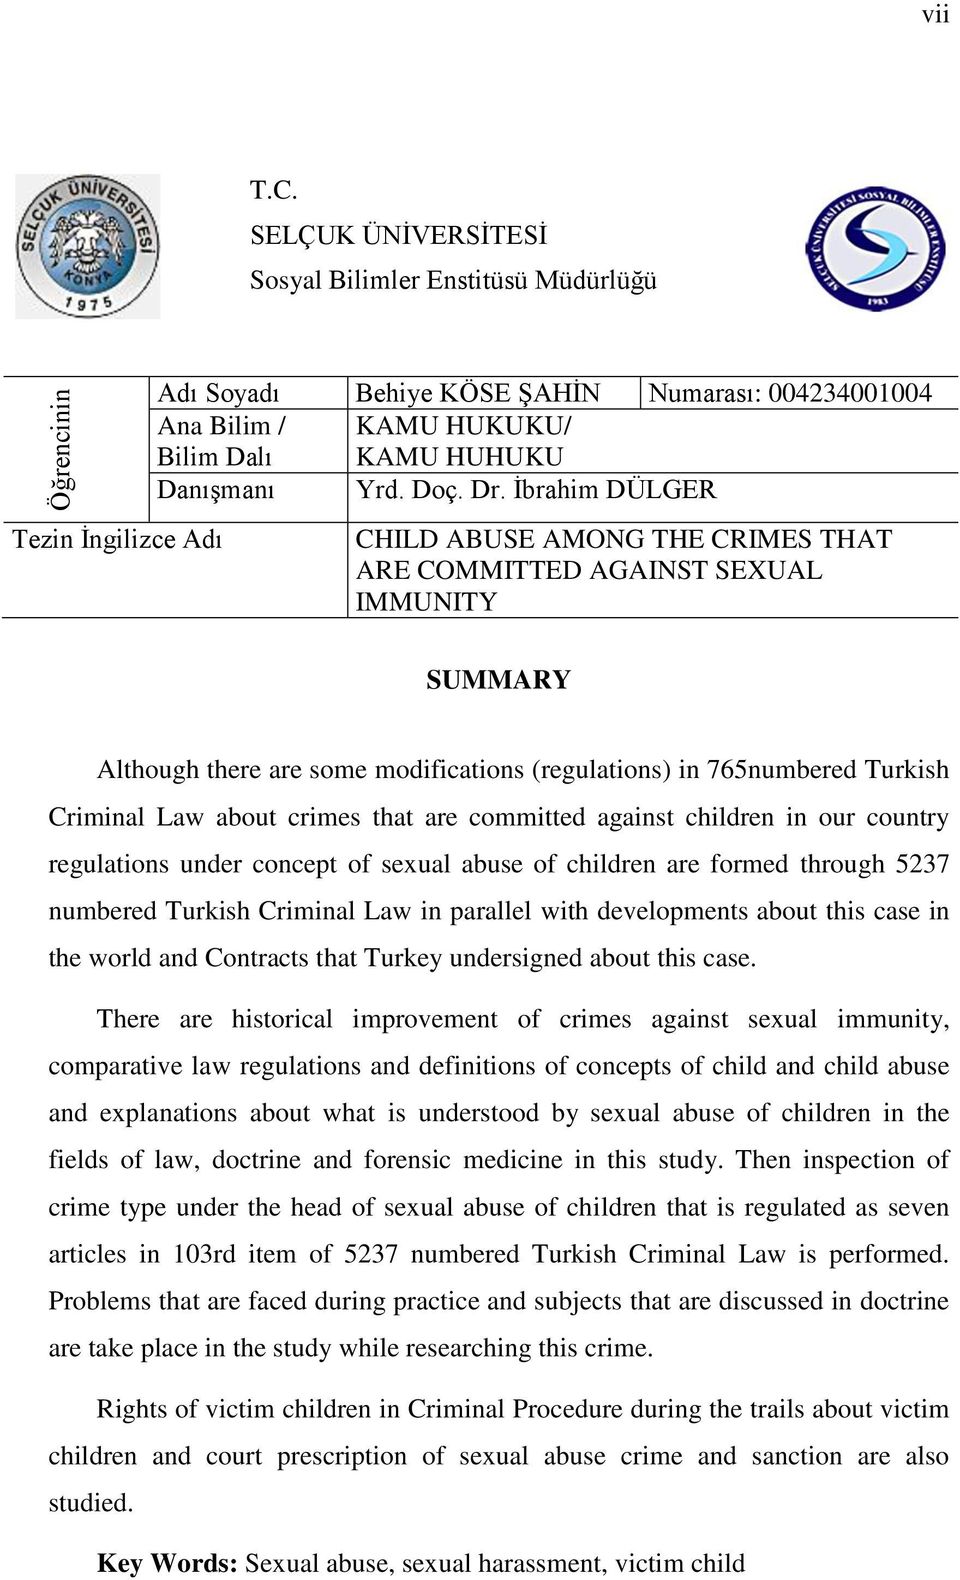 Ġbrahim DÜLGER CHILD ABUSE AMONG THE CRIMES THAT ARE COMMITTED AGAINST SEXUAL IMMUNITY SUMMARY Although there are some modifications (regulations) in 765numbered Turkish Criminal Law about crimes